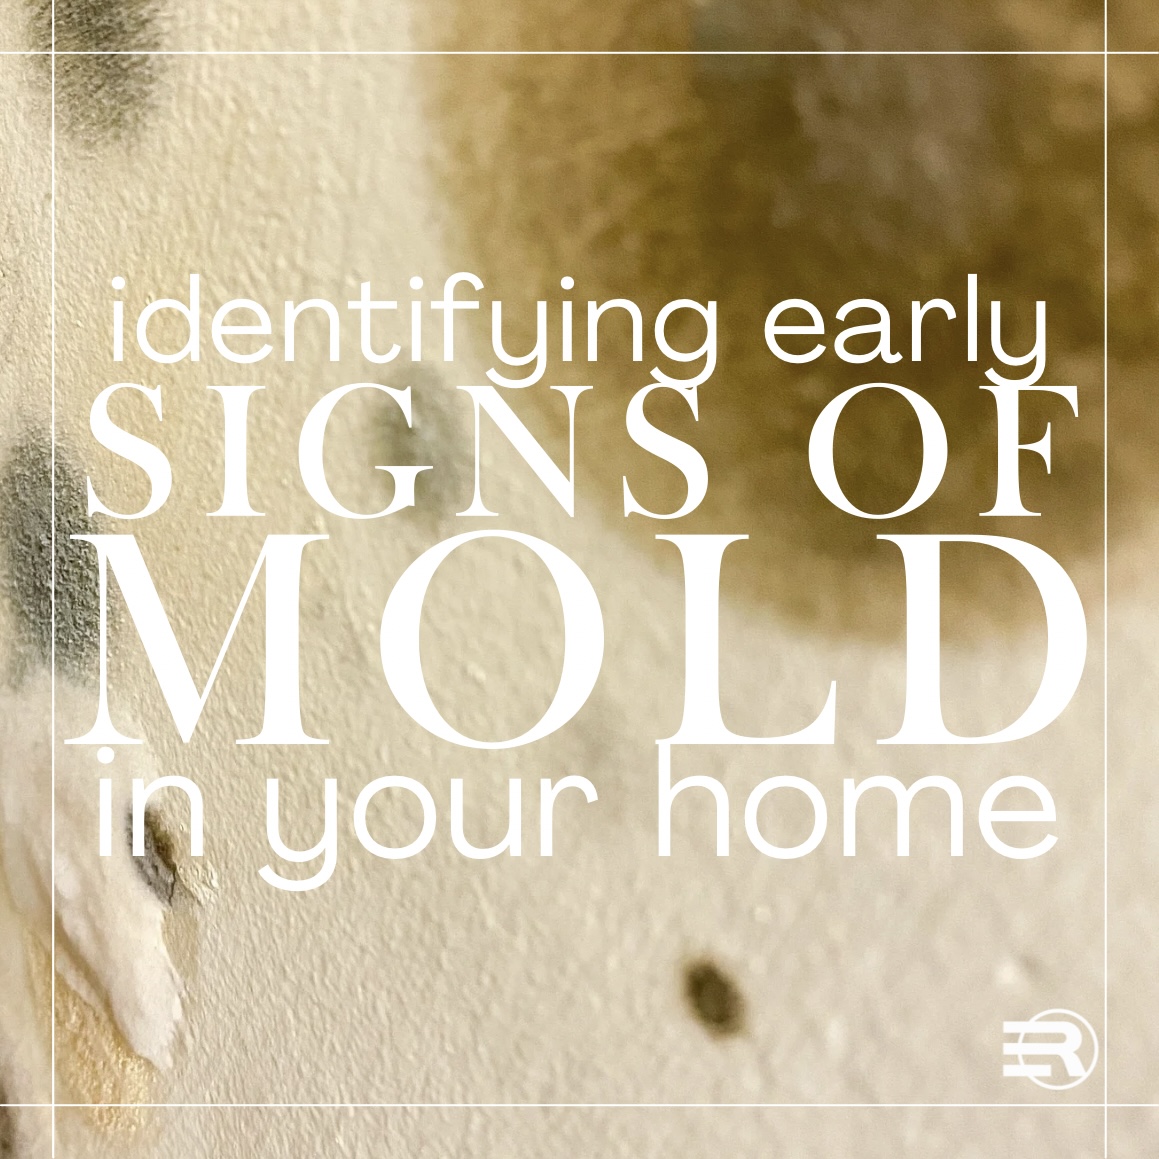 Identifying early signs of Mold in your home